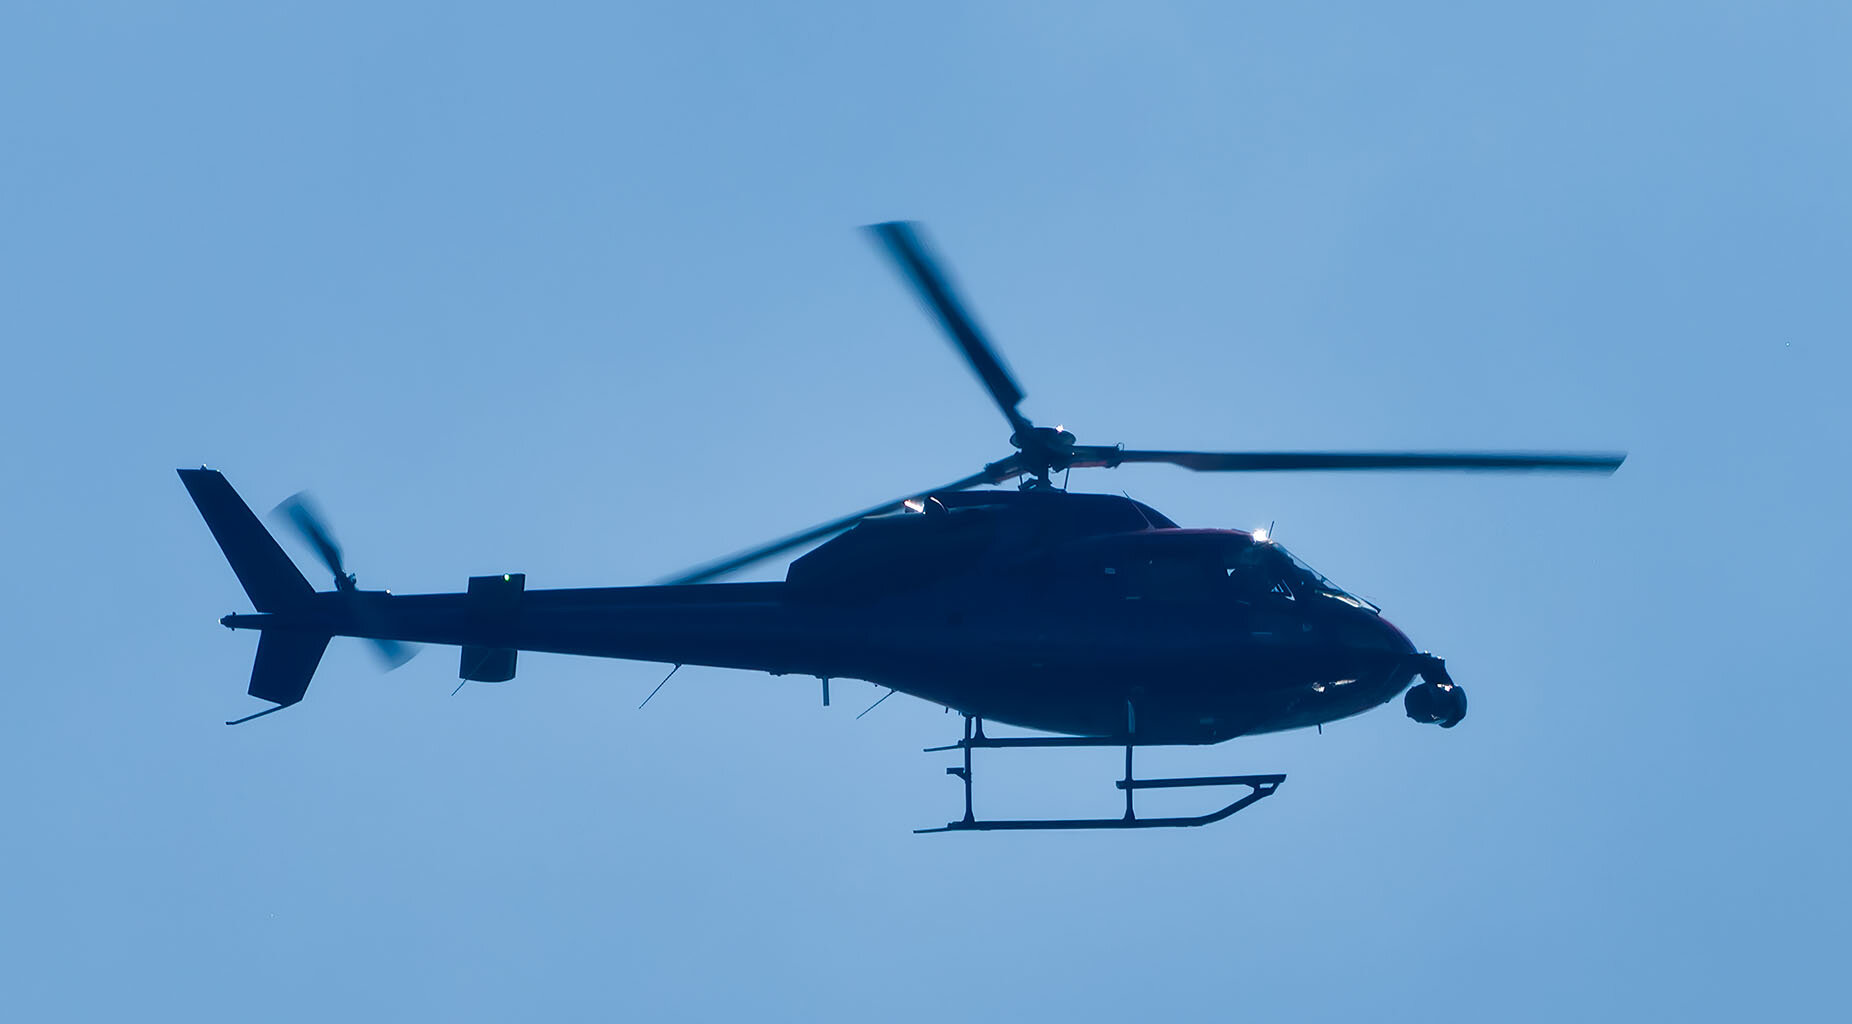 Camera helicopter maybe Airbus H125